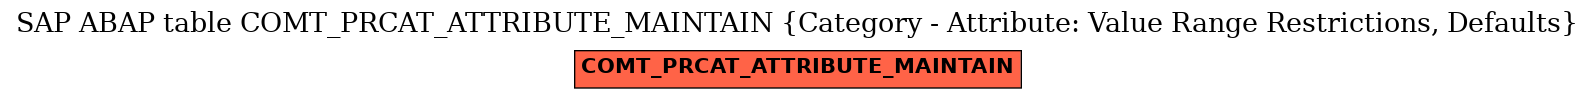 E-R Diagram for table COMT_PRCAT_ATTRIBUTE_MAINTAIN (Category - Attribute: Value Range Restrictions, Defaults)